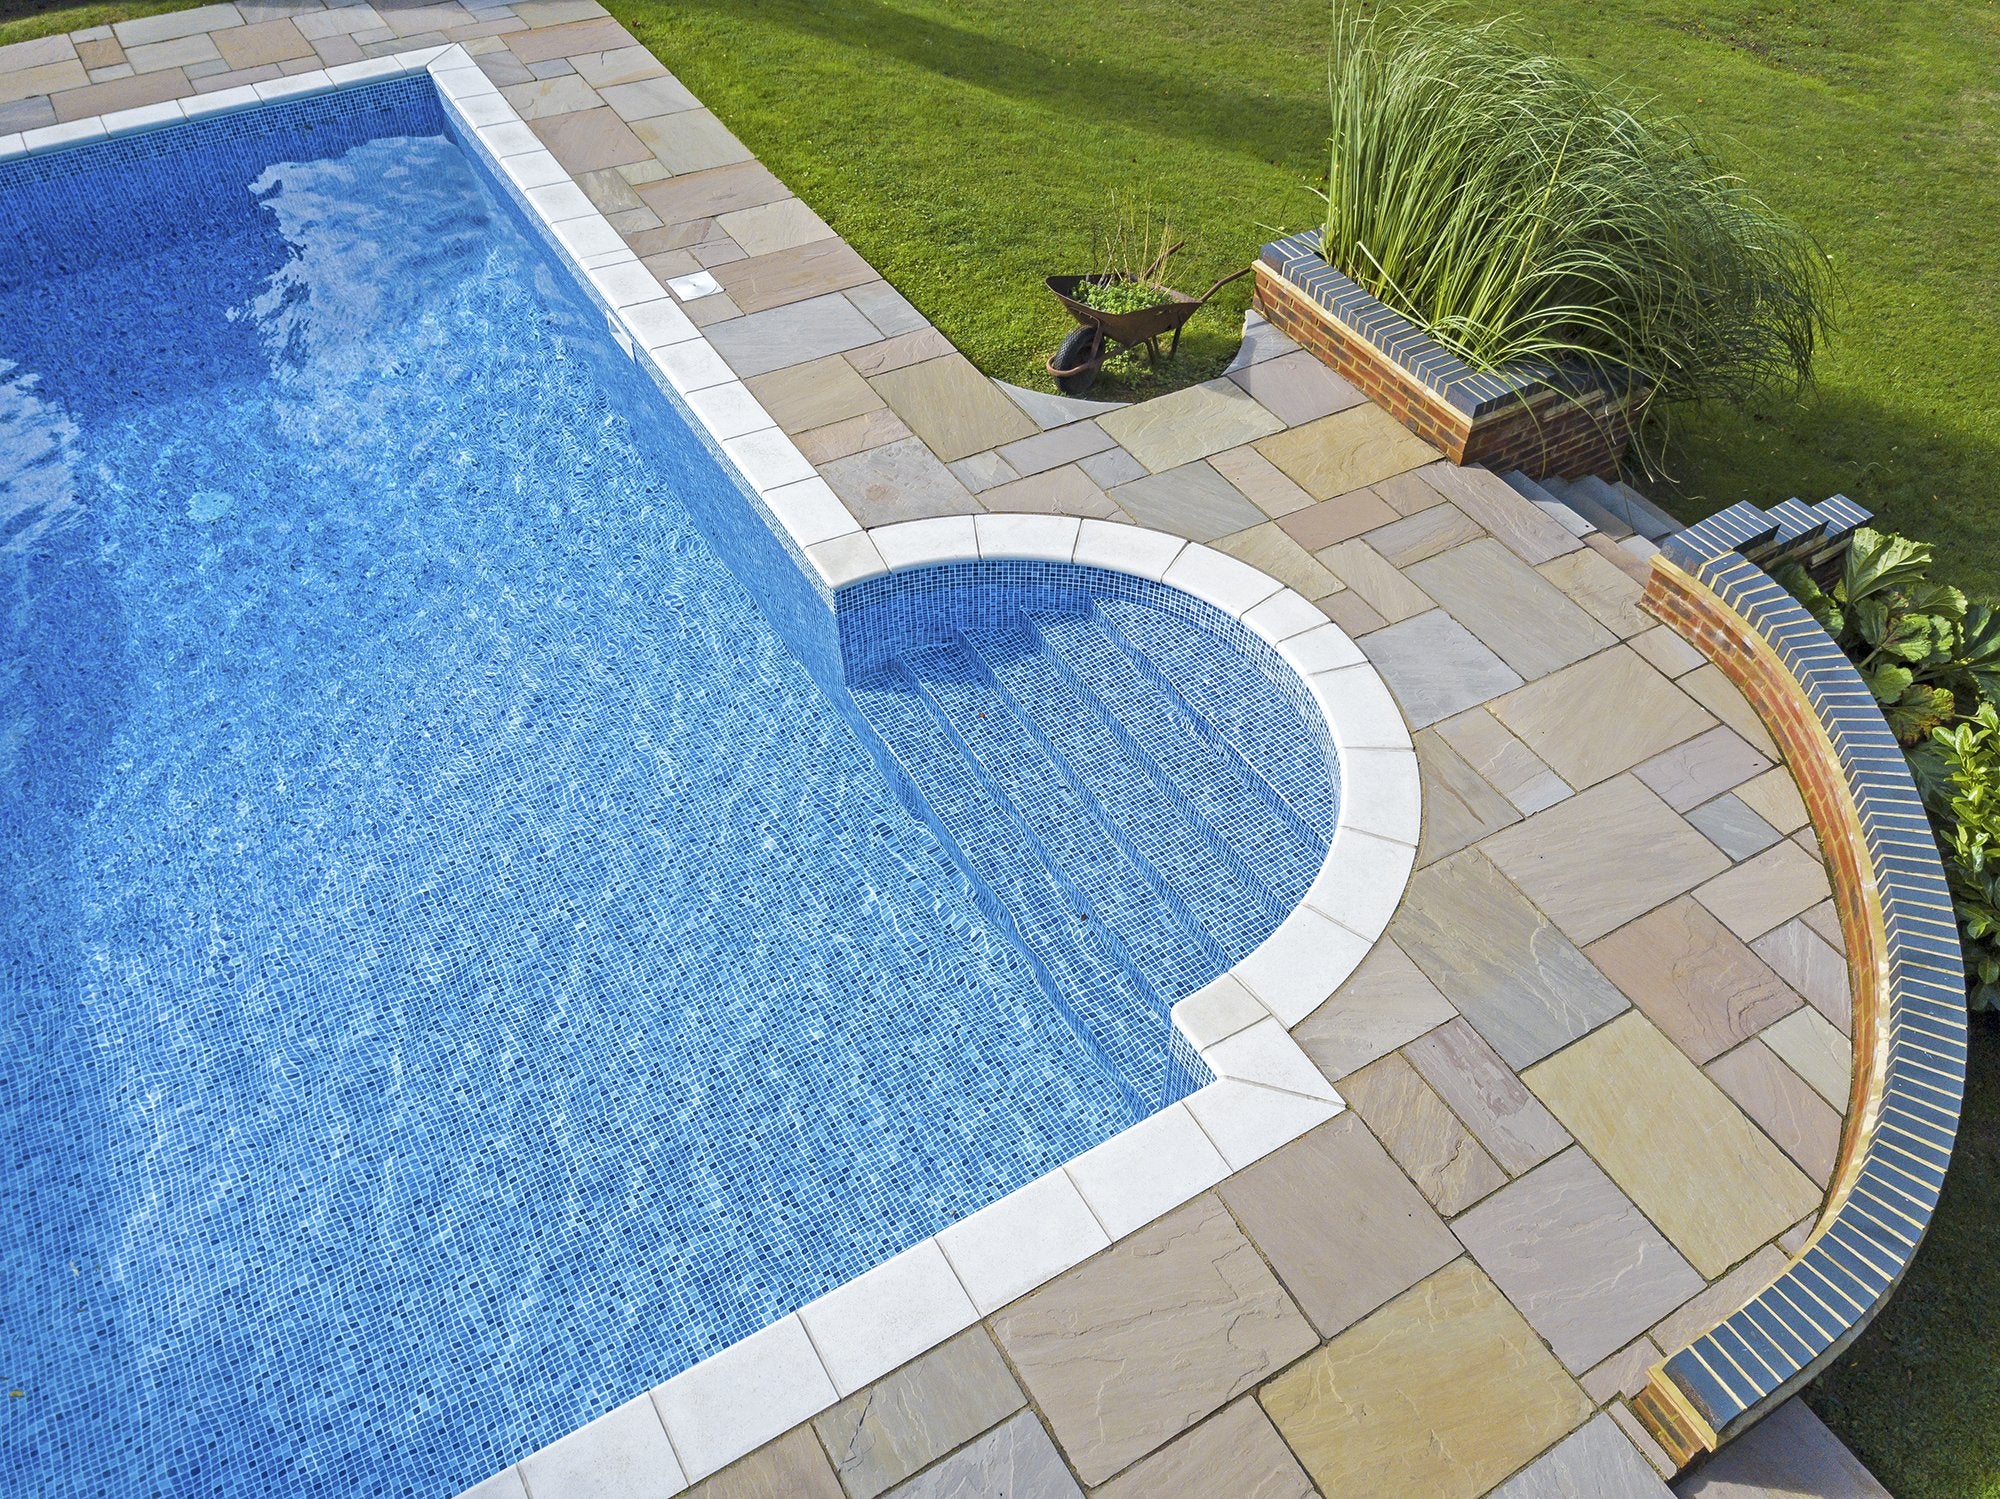 Swimming pool running costs to consider